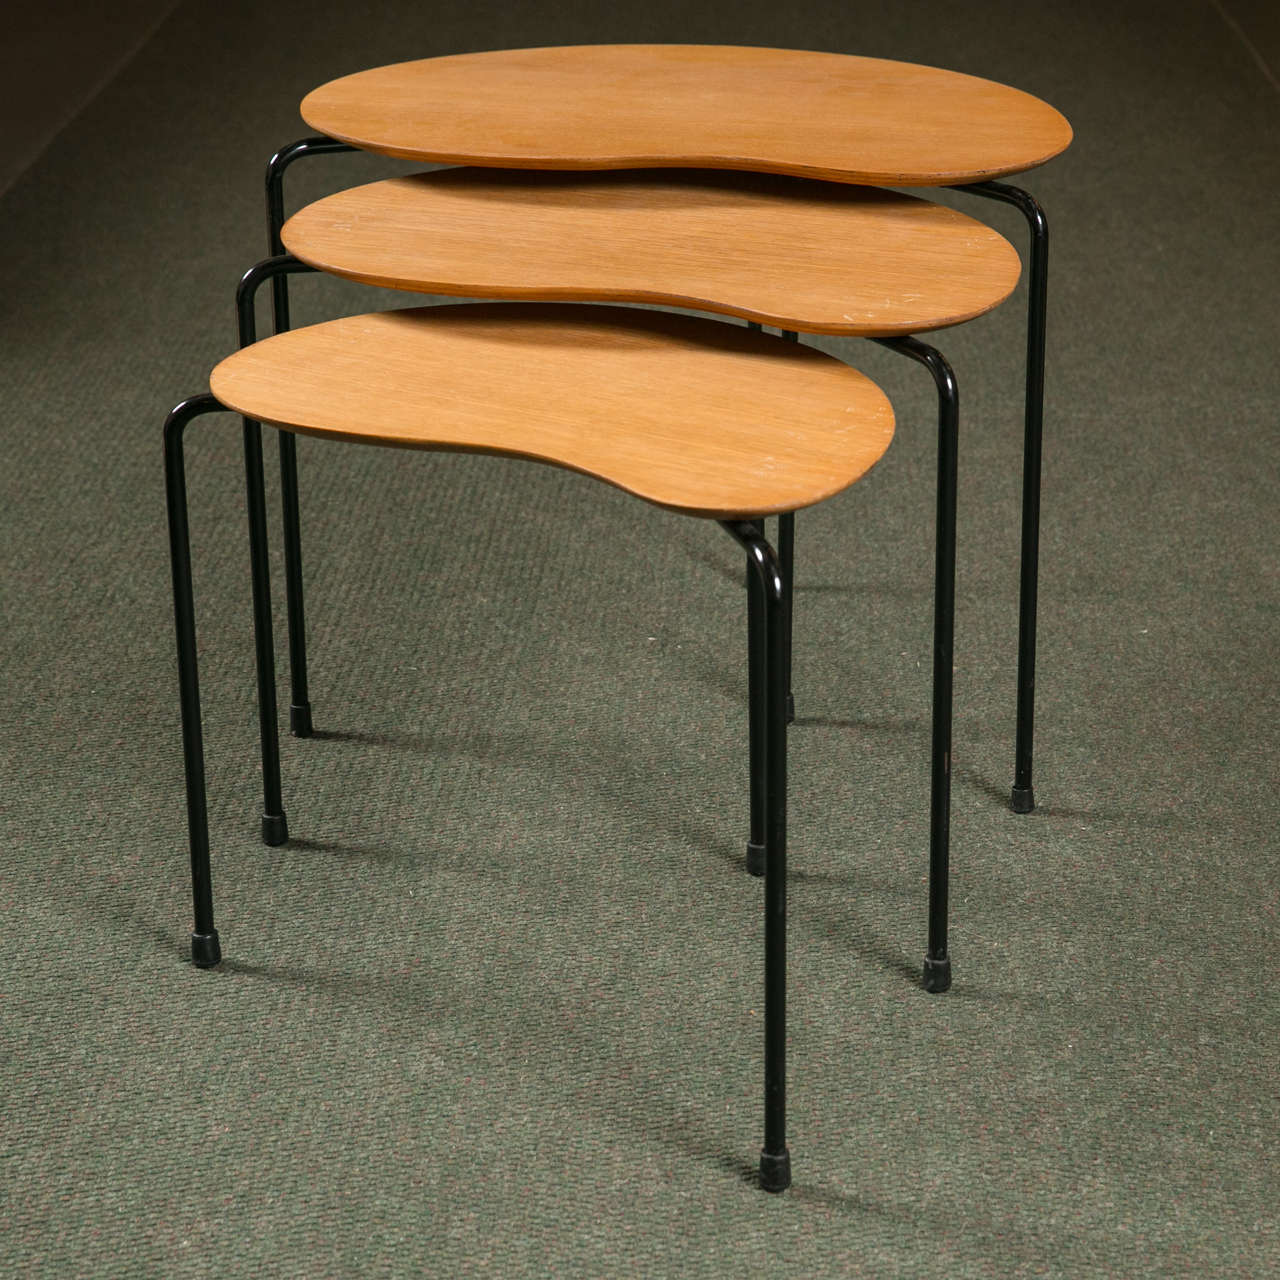 A Mid-Century Modern set of three nesting tables in laminated oak.